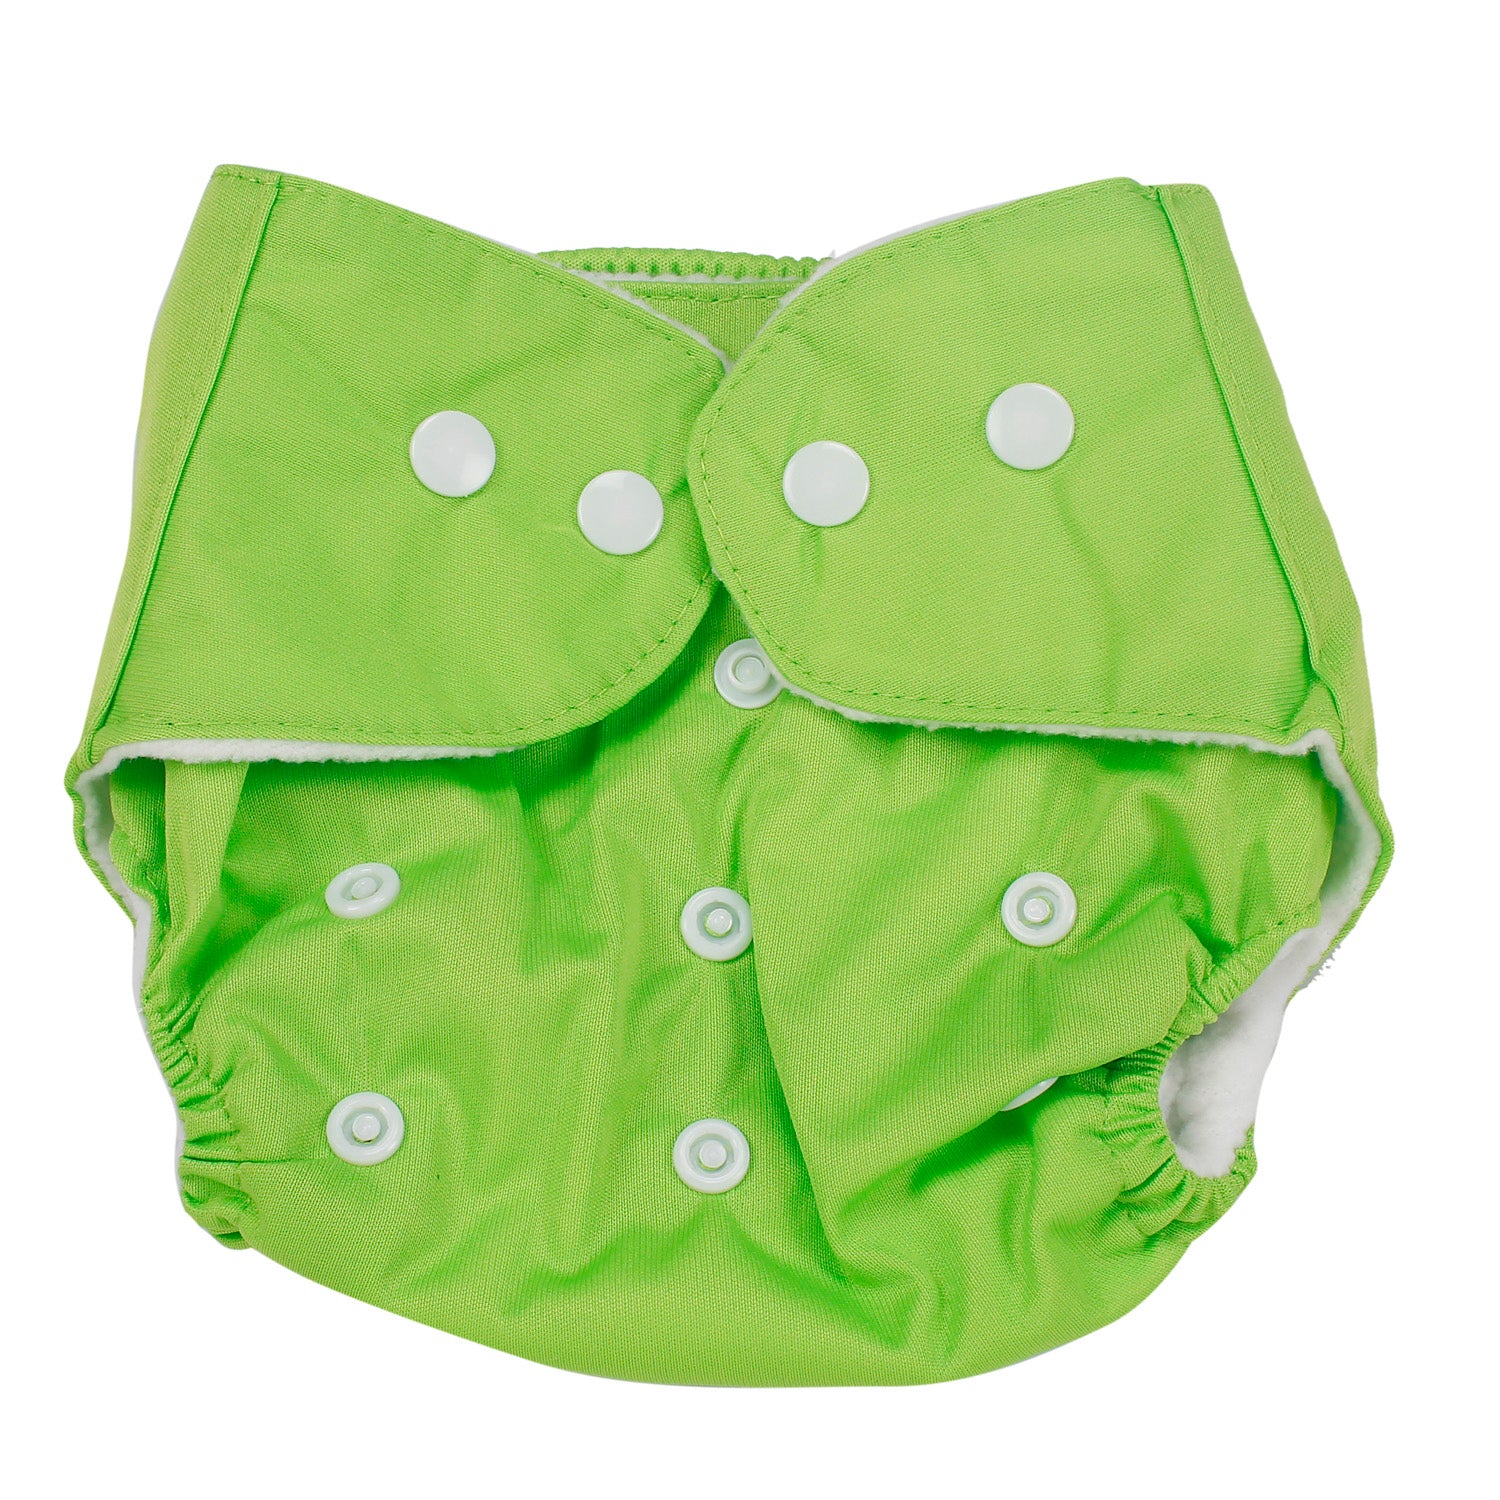 Buy SuperBottoms Basic Cloth Diaper  Freesize Adjustable Washable  Reusable  Cloth Diaper For Day Time Use With Dry Feel PadSoakerInsert Cupcake  Online at Best Price of Rs 749  bigbasket